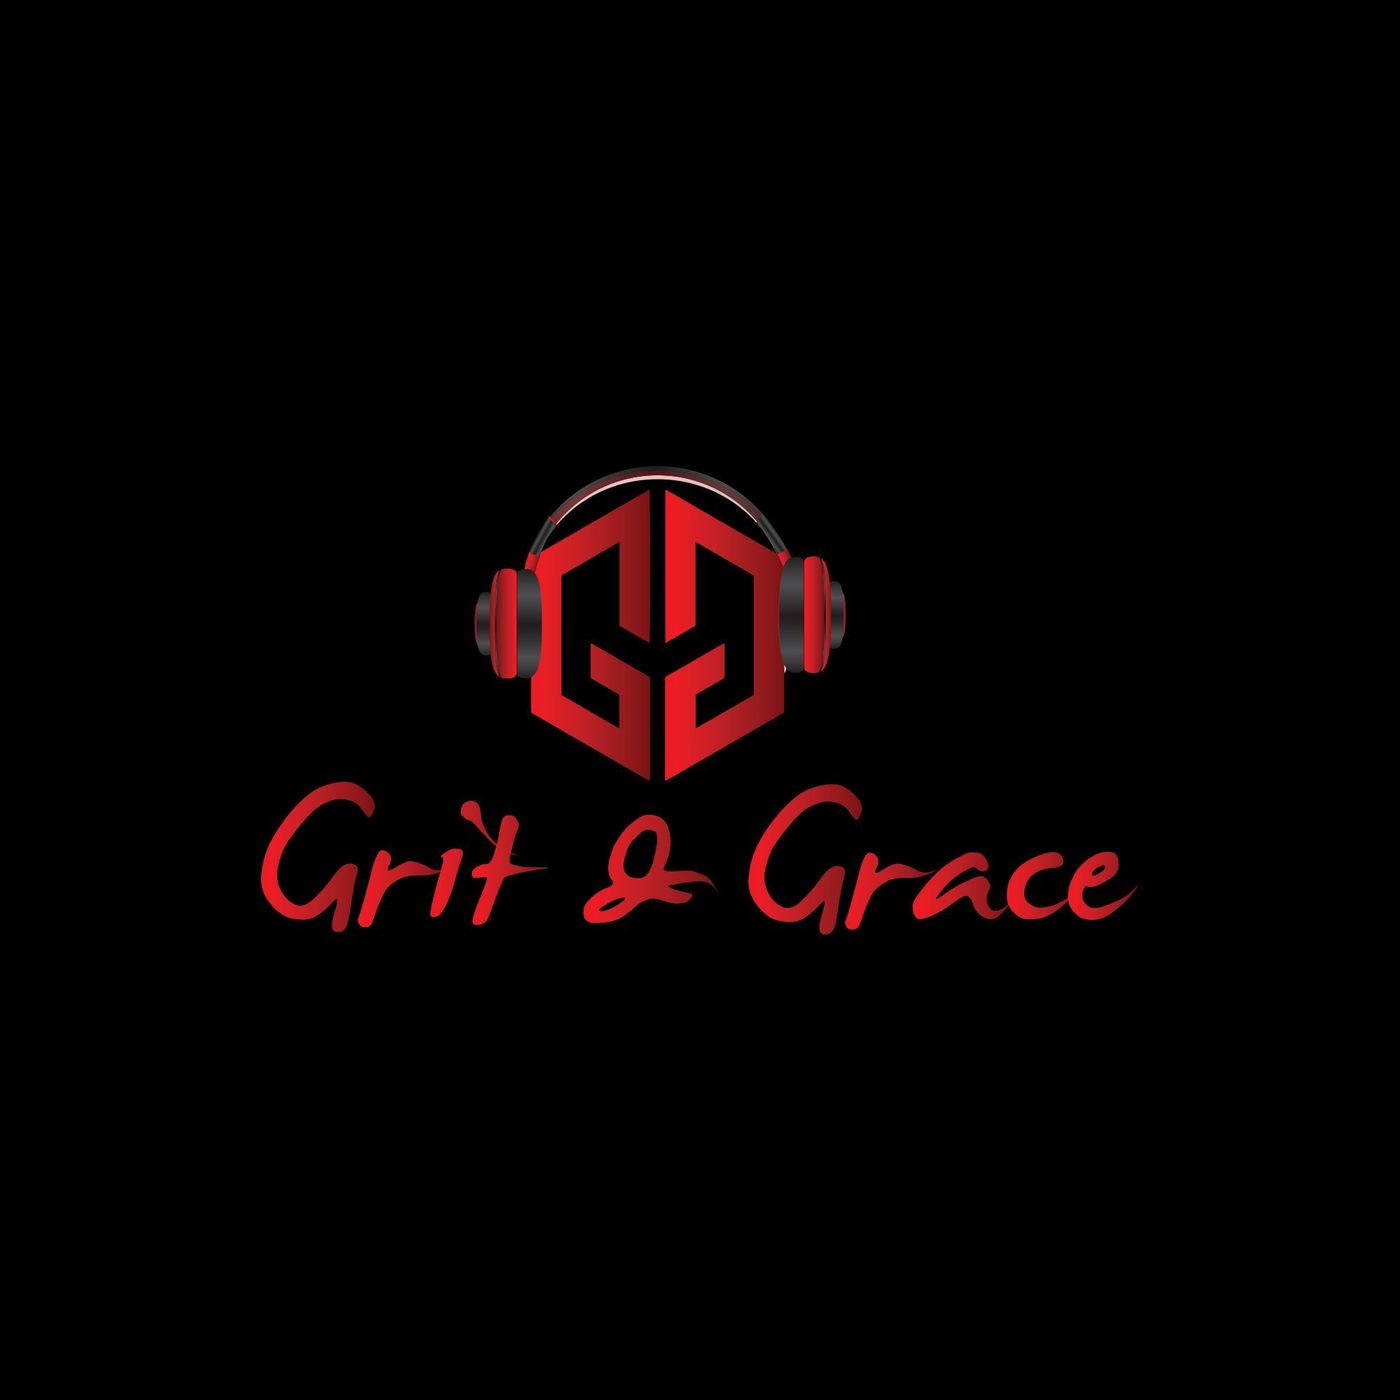 Grit and Grace: The Magic of Joy